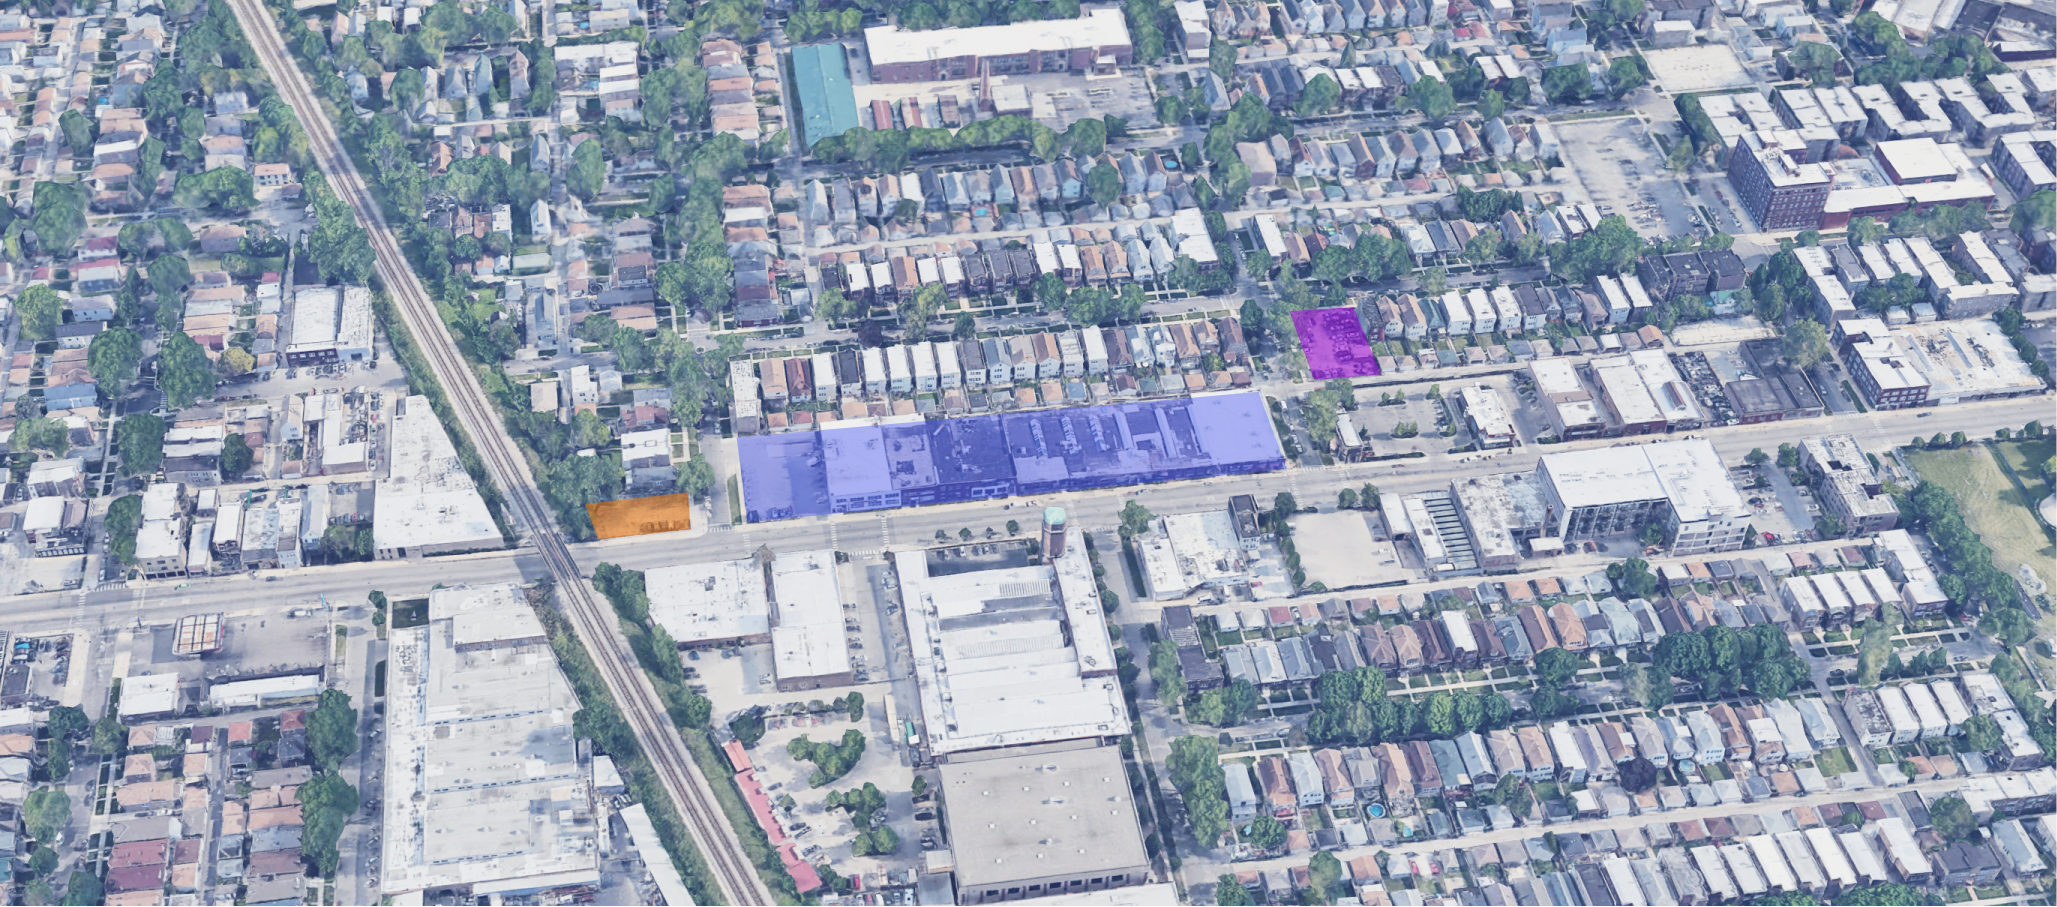 The land in development by Noah Properties, LLC. From left to right: 3202 N Kildare Avenue (orange), the planned townhomes (blue), and 4153 W Melrose Street (purple)